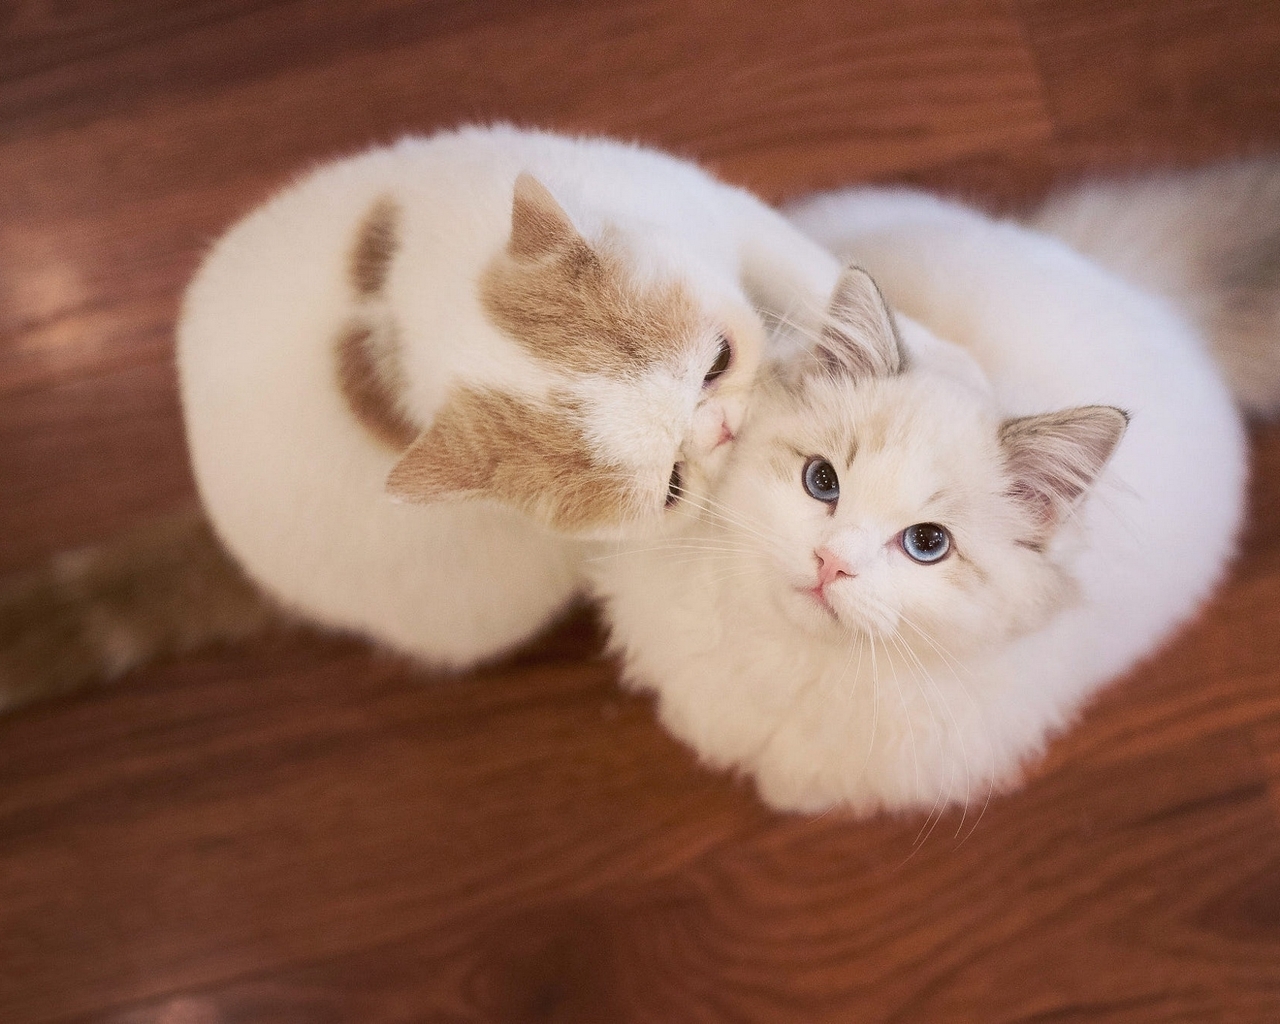 Image: Cats, cute, fluffy, furry, couple, view from above